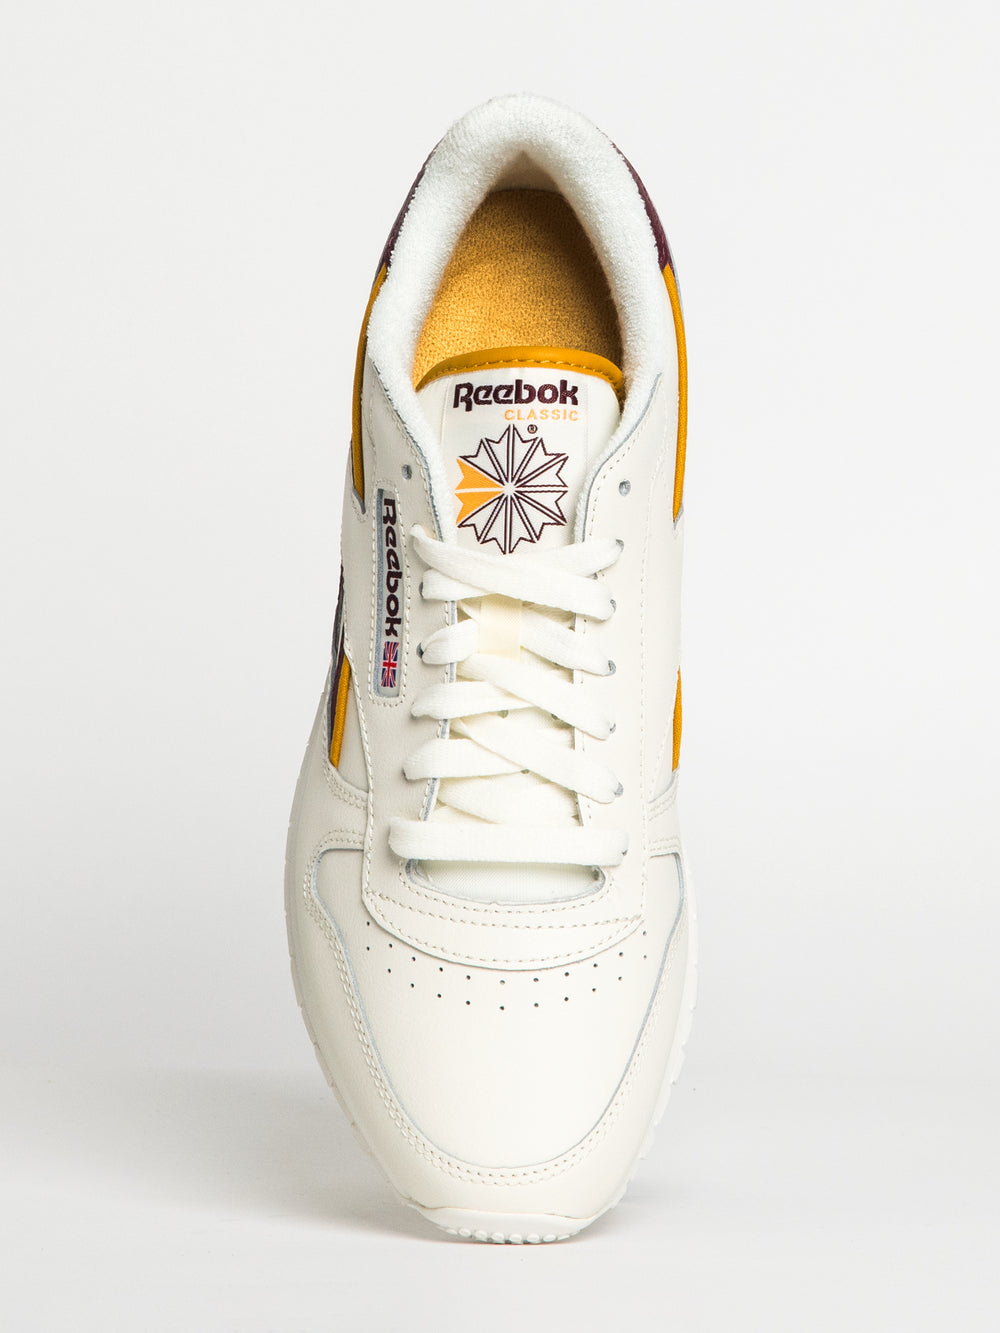 SNEAKER | MENS Footwear LEATHER Collective REEBOK Boathouse CLASSIC